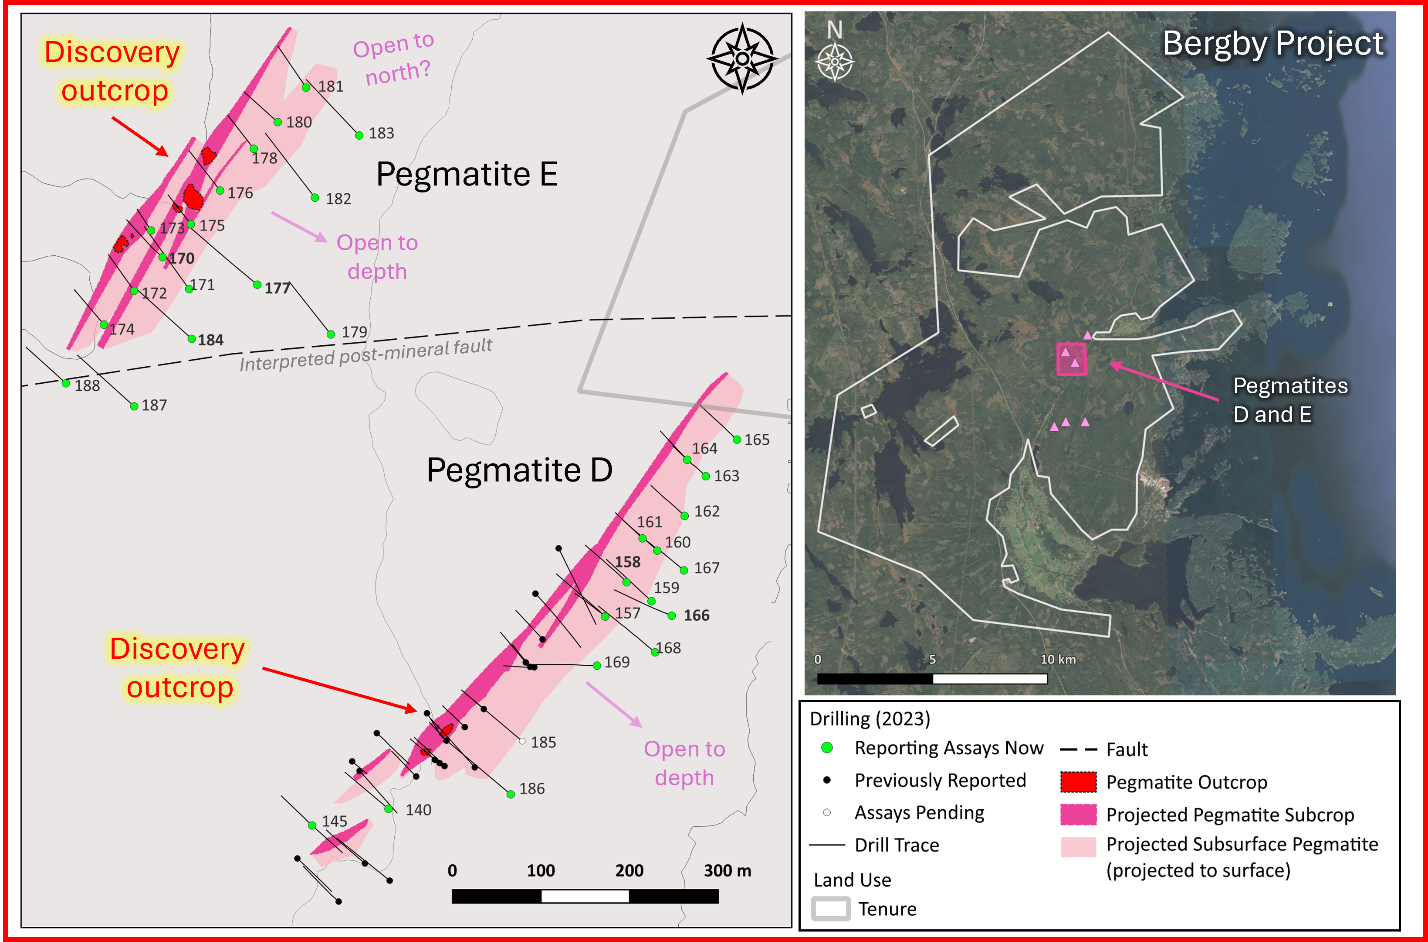 Bergby Project Pegmatites D and E and Drill Holes, June 12, 2024